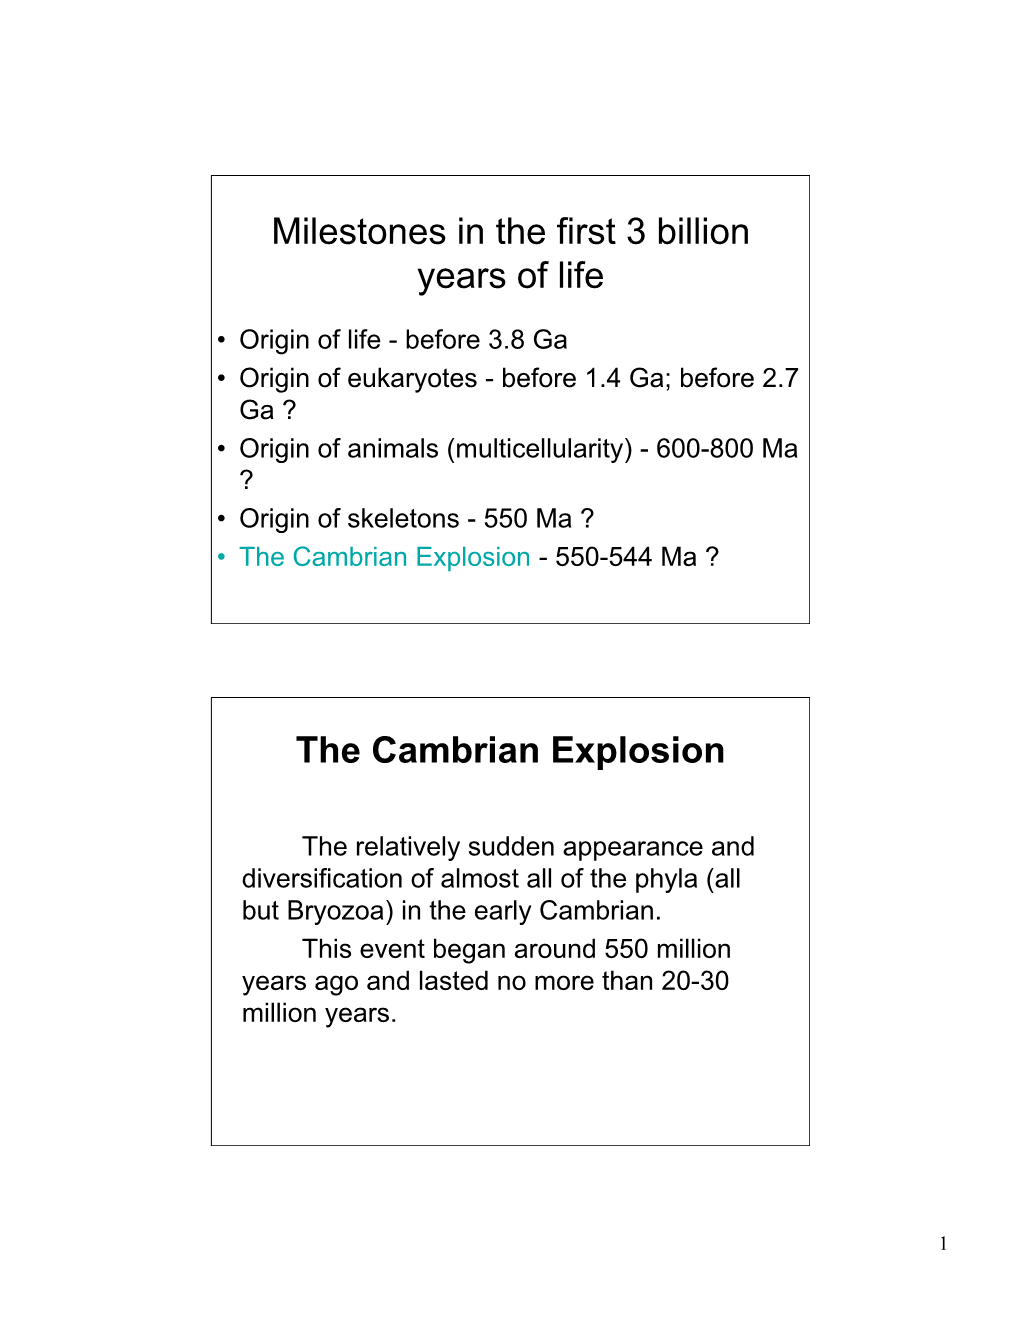 The Cambrian Explosion - 550-544 Ma ?